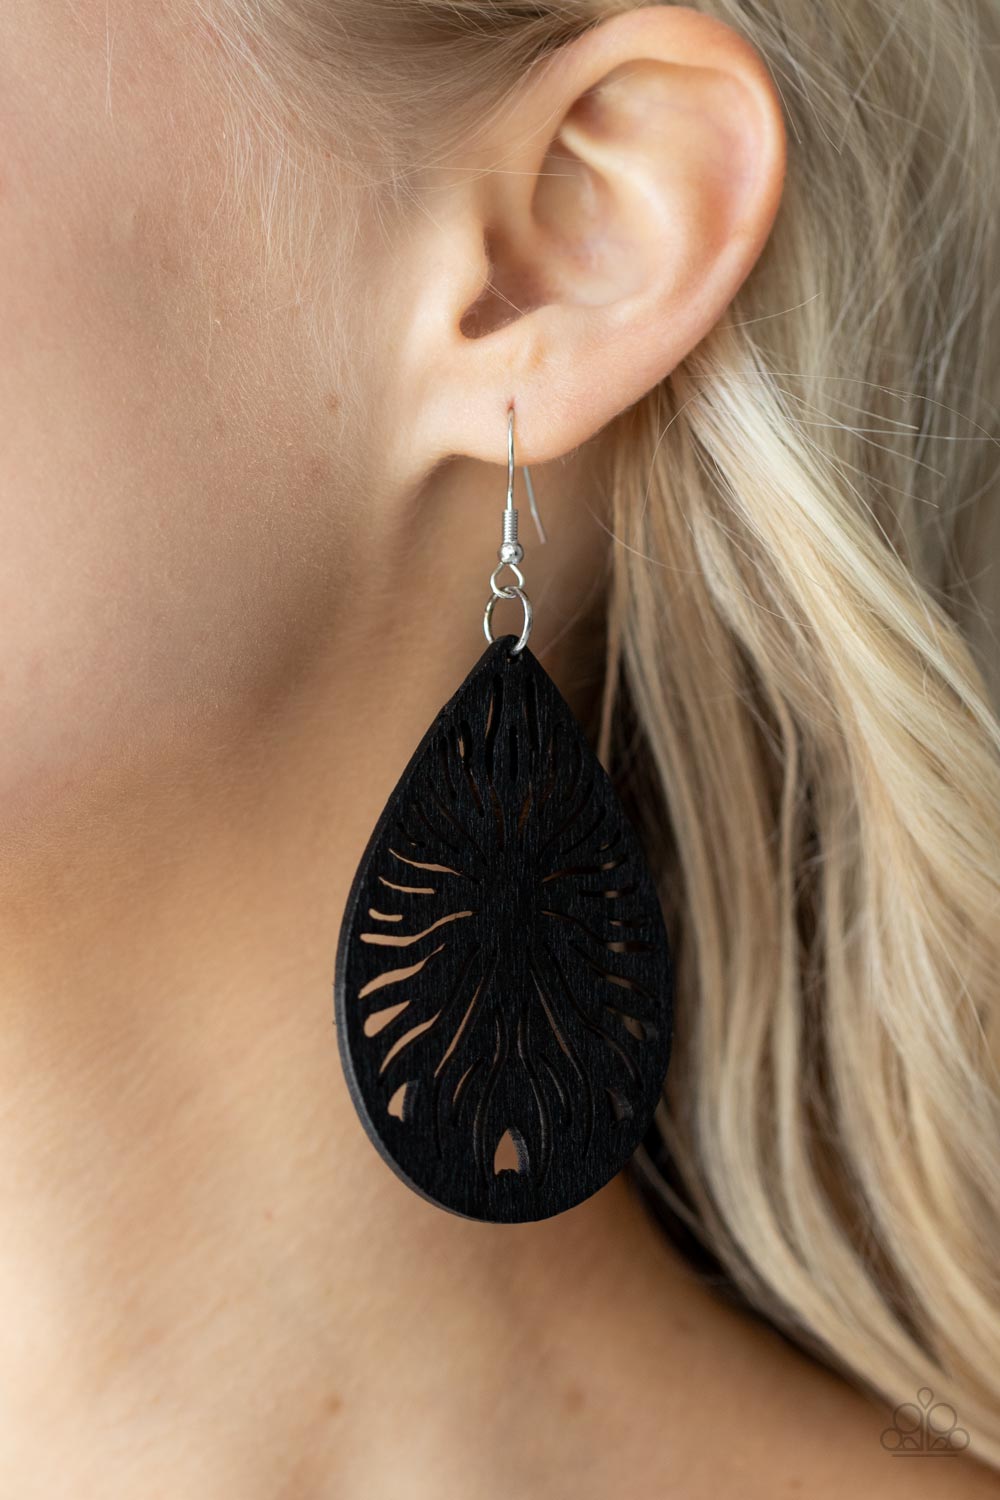 Sunny Incantations Black Wood Earrings - Paparazzi Accessories- lightbox - CarasShop.com - $5 Jewelry by Cara Jewels